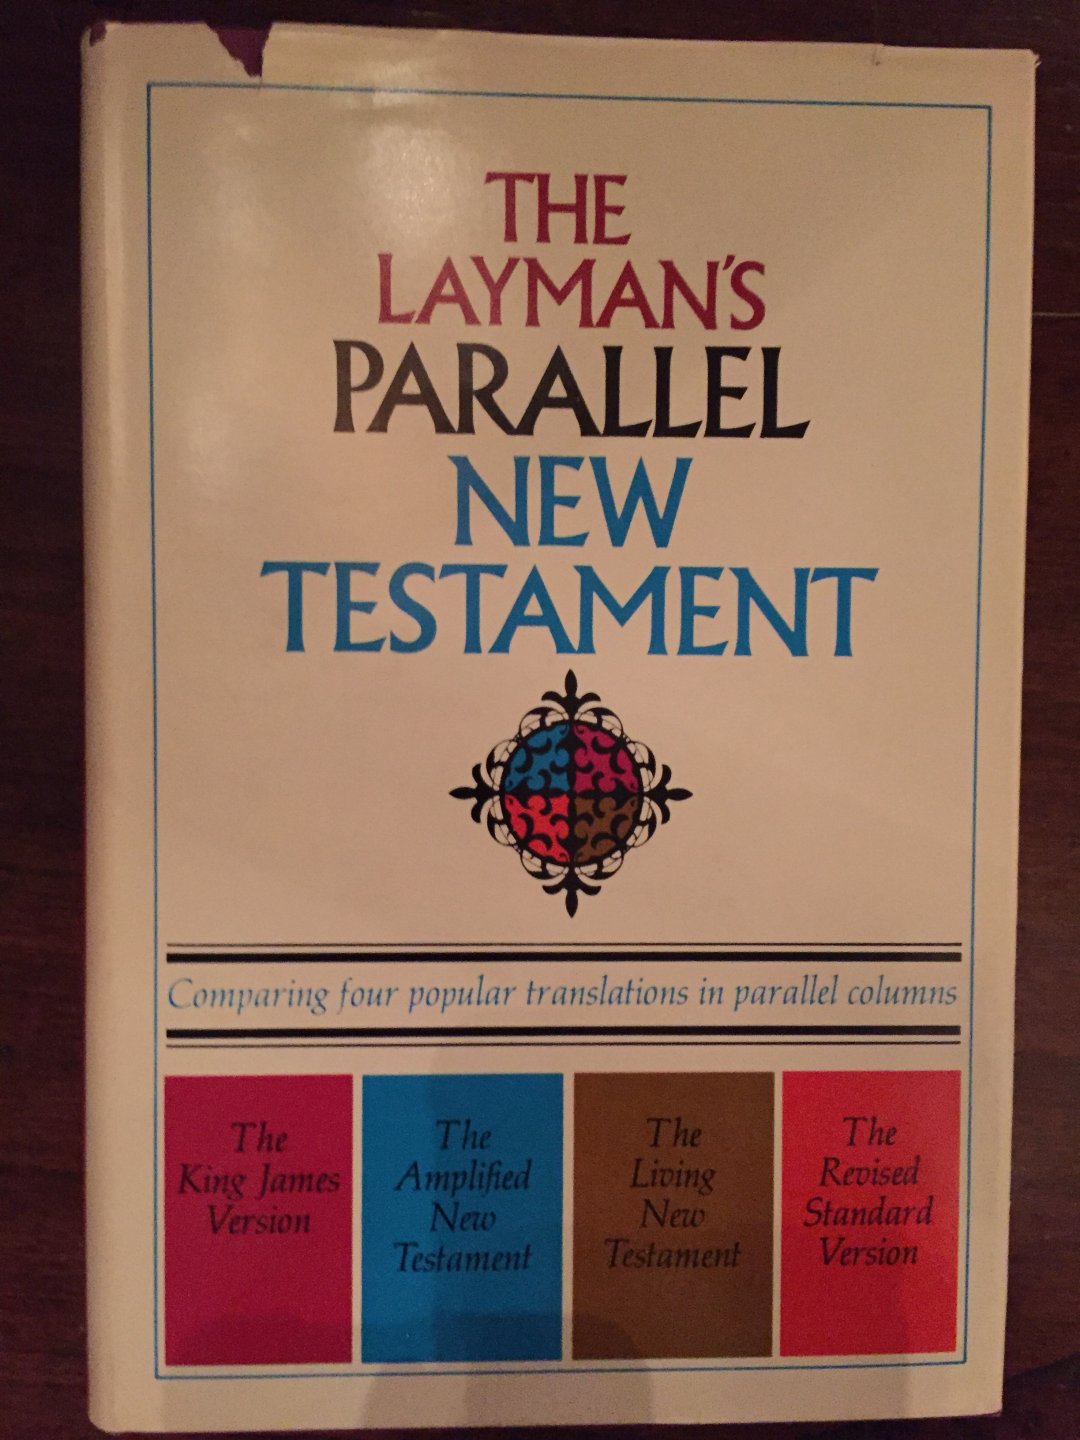  - The Layman's Parallel New Testament - The King James Version/The Amplified New Testament/The Living New Testament/The Revised Standard Version